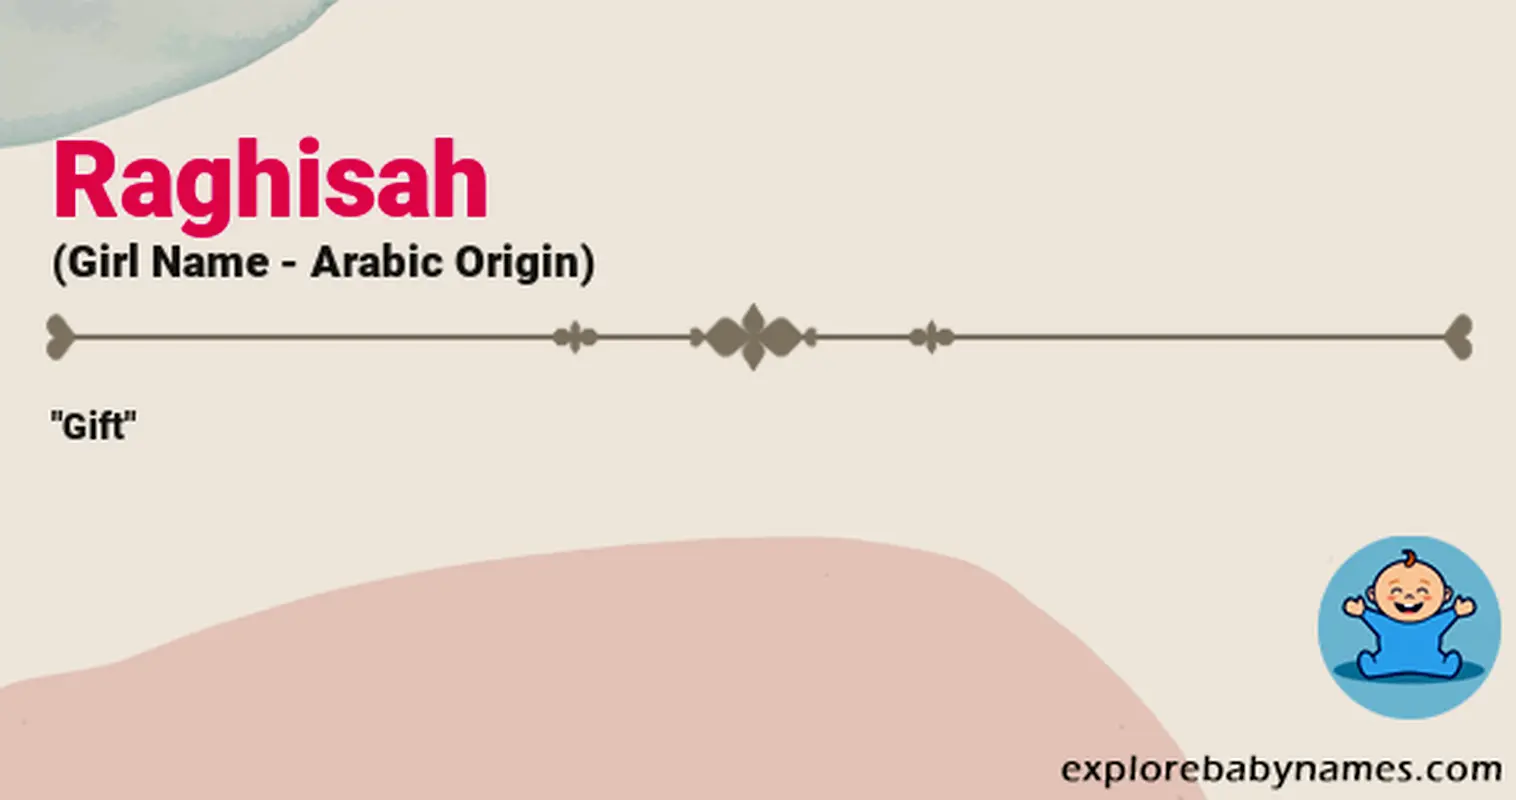 Meaning of Raghisah